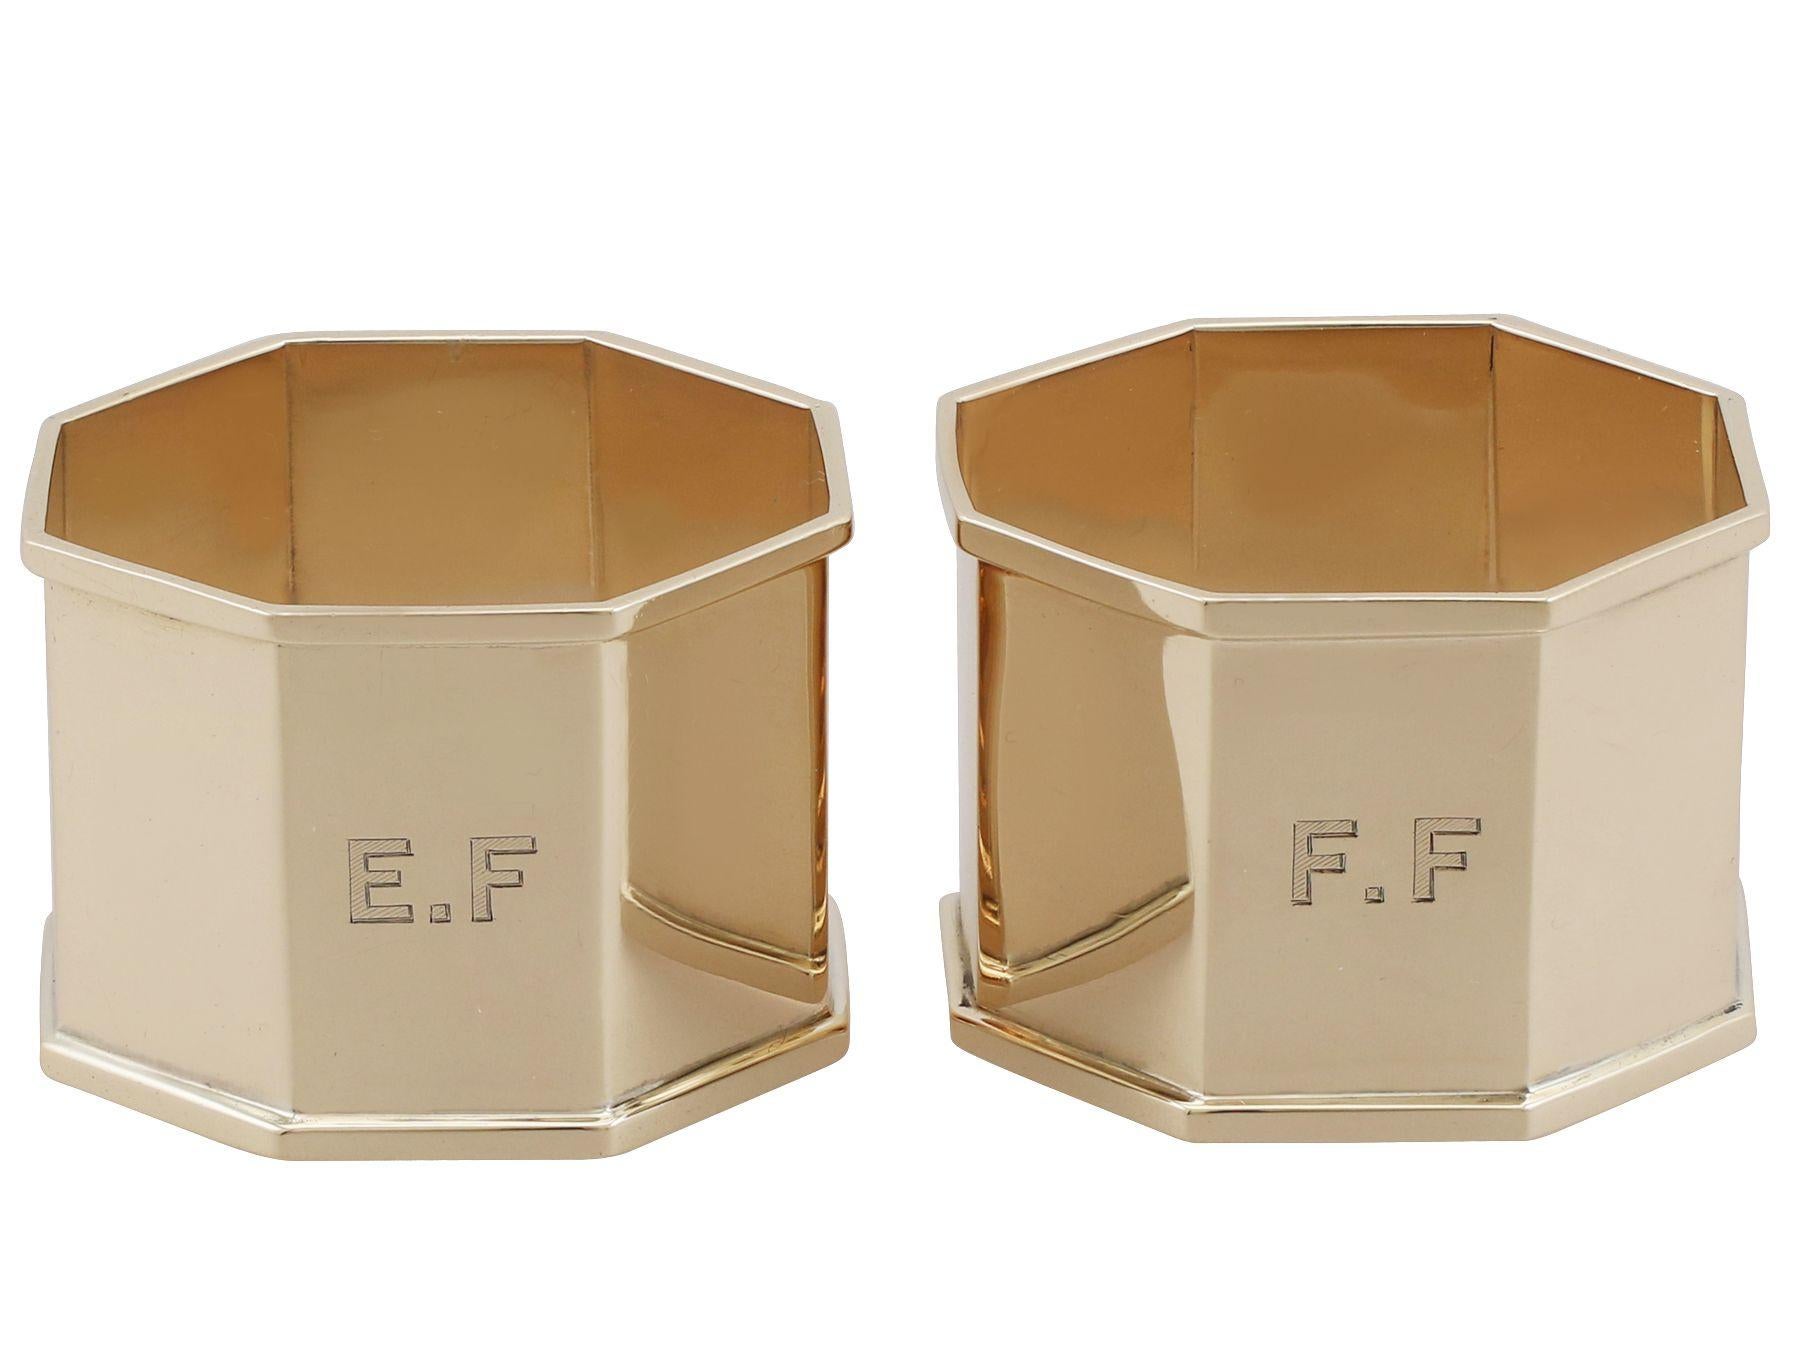 An exceptional, fine and impressive pair of vintage George VI English 9-karat yellow gold napkin rings - boxed; part of our dining silverware collection

These exceptional vintage English 9k yellow gold napkin rings have an octagonal shaped